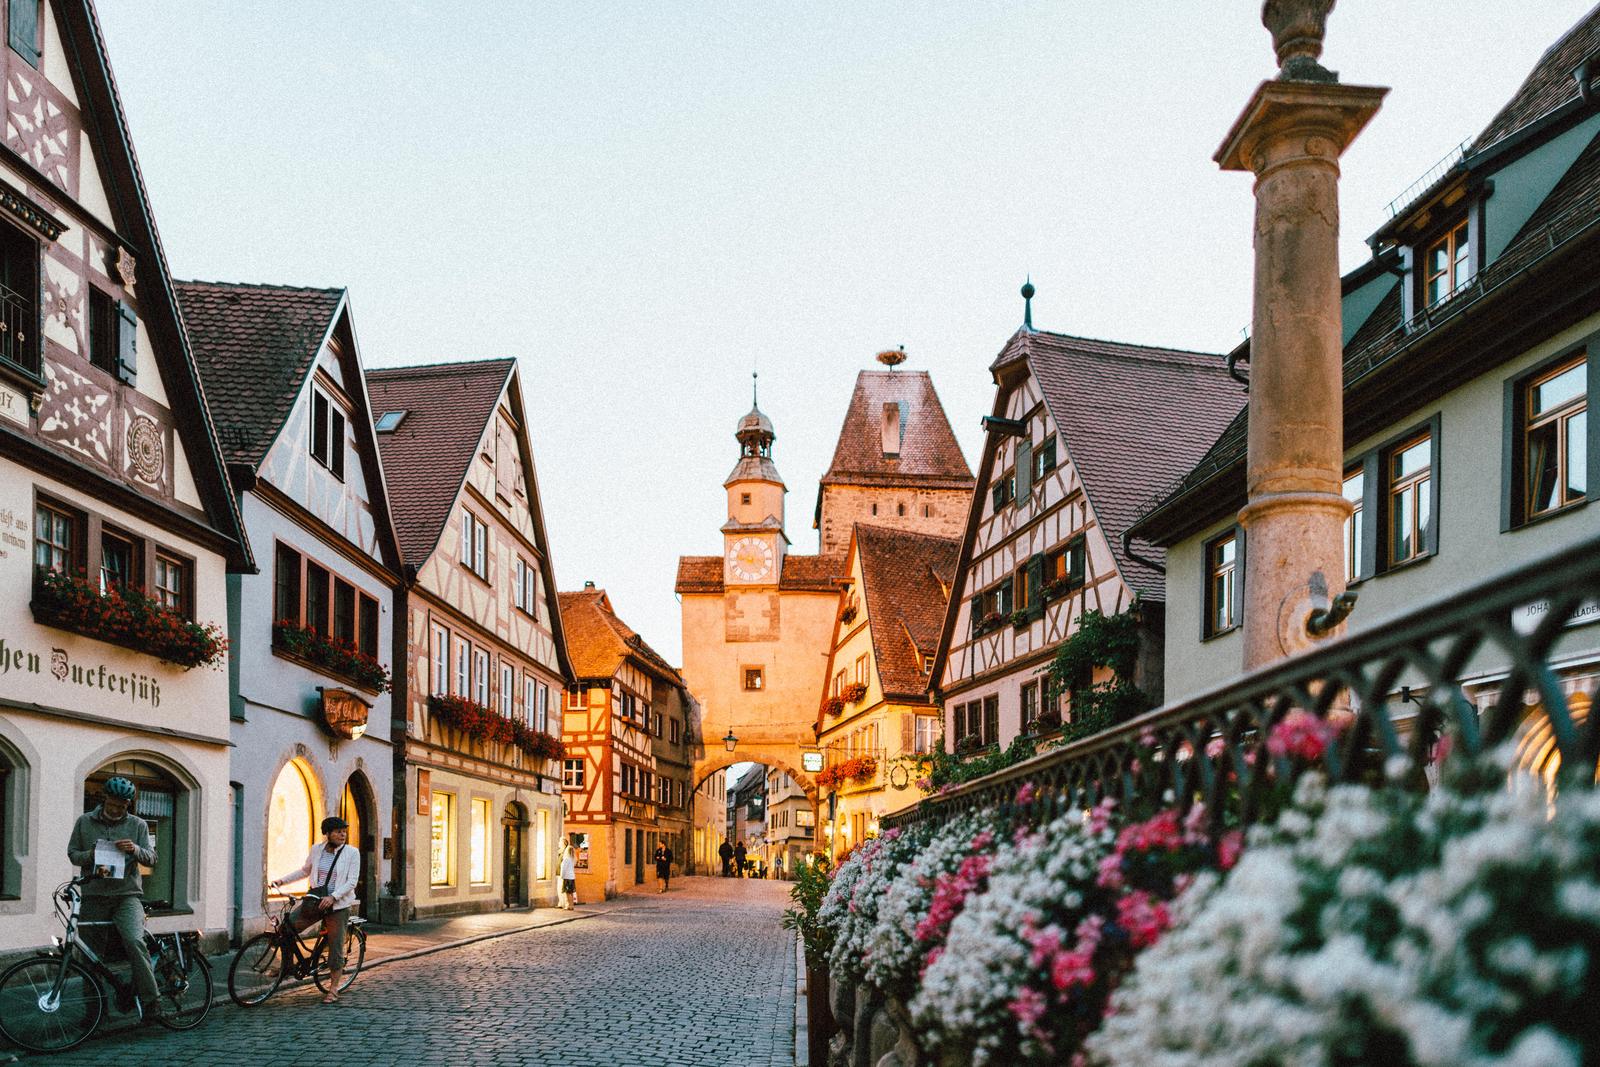 Make Yourself Proud by Passing This Geography Test That Gets Progressively Harder Rothenburg, Germany